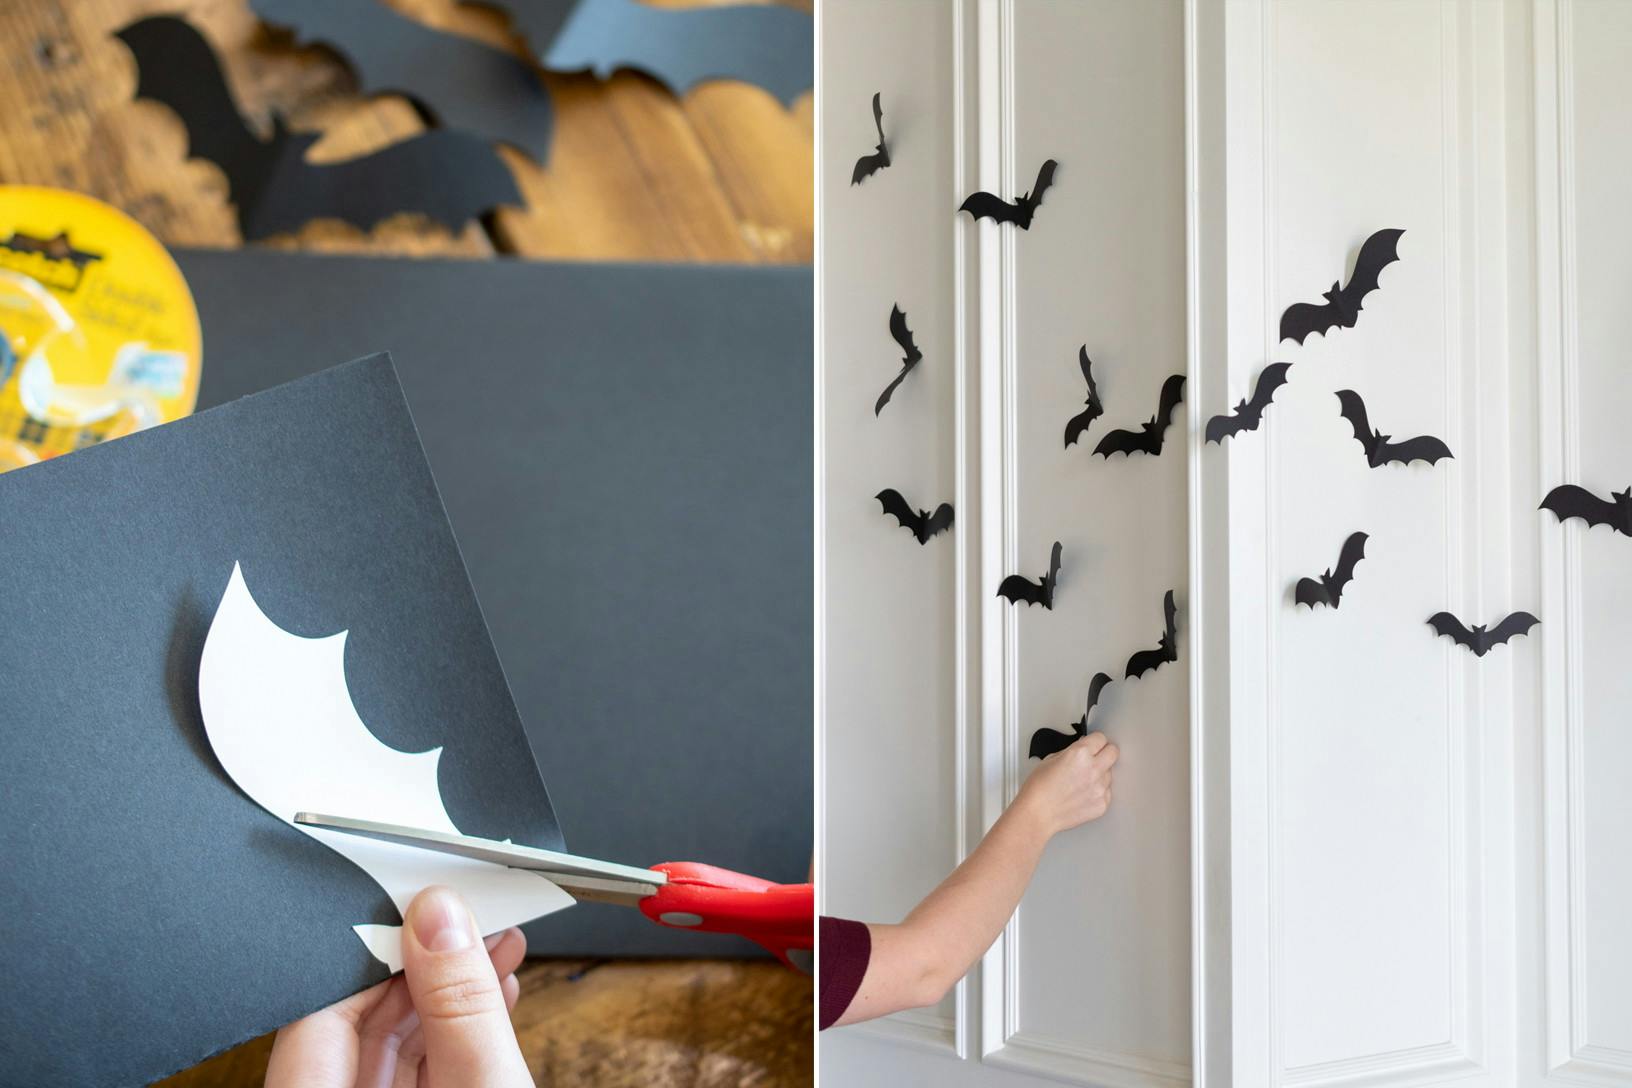 Two photos side-by-side; a person cutting out paper bats from black construction paper. A person attaching the black construction paper bats to a wall